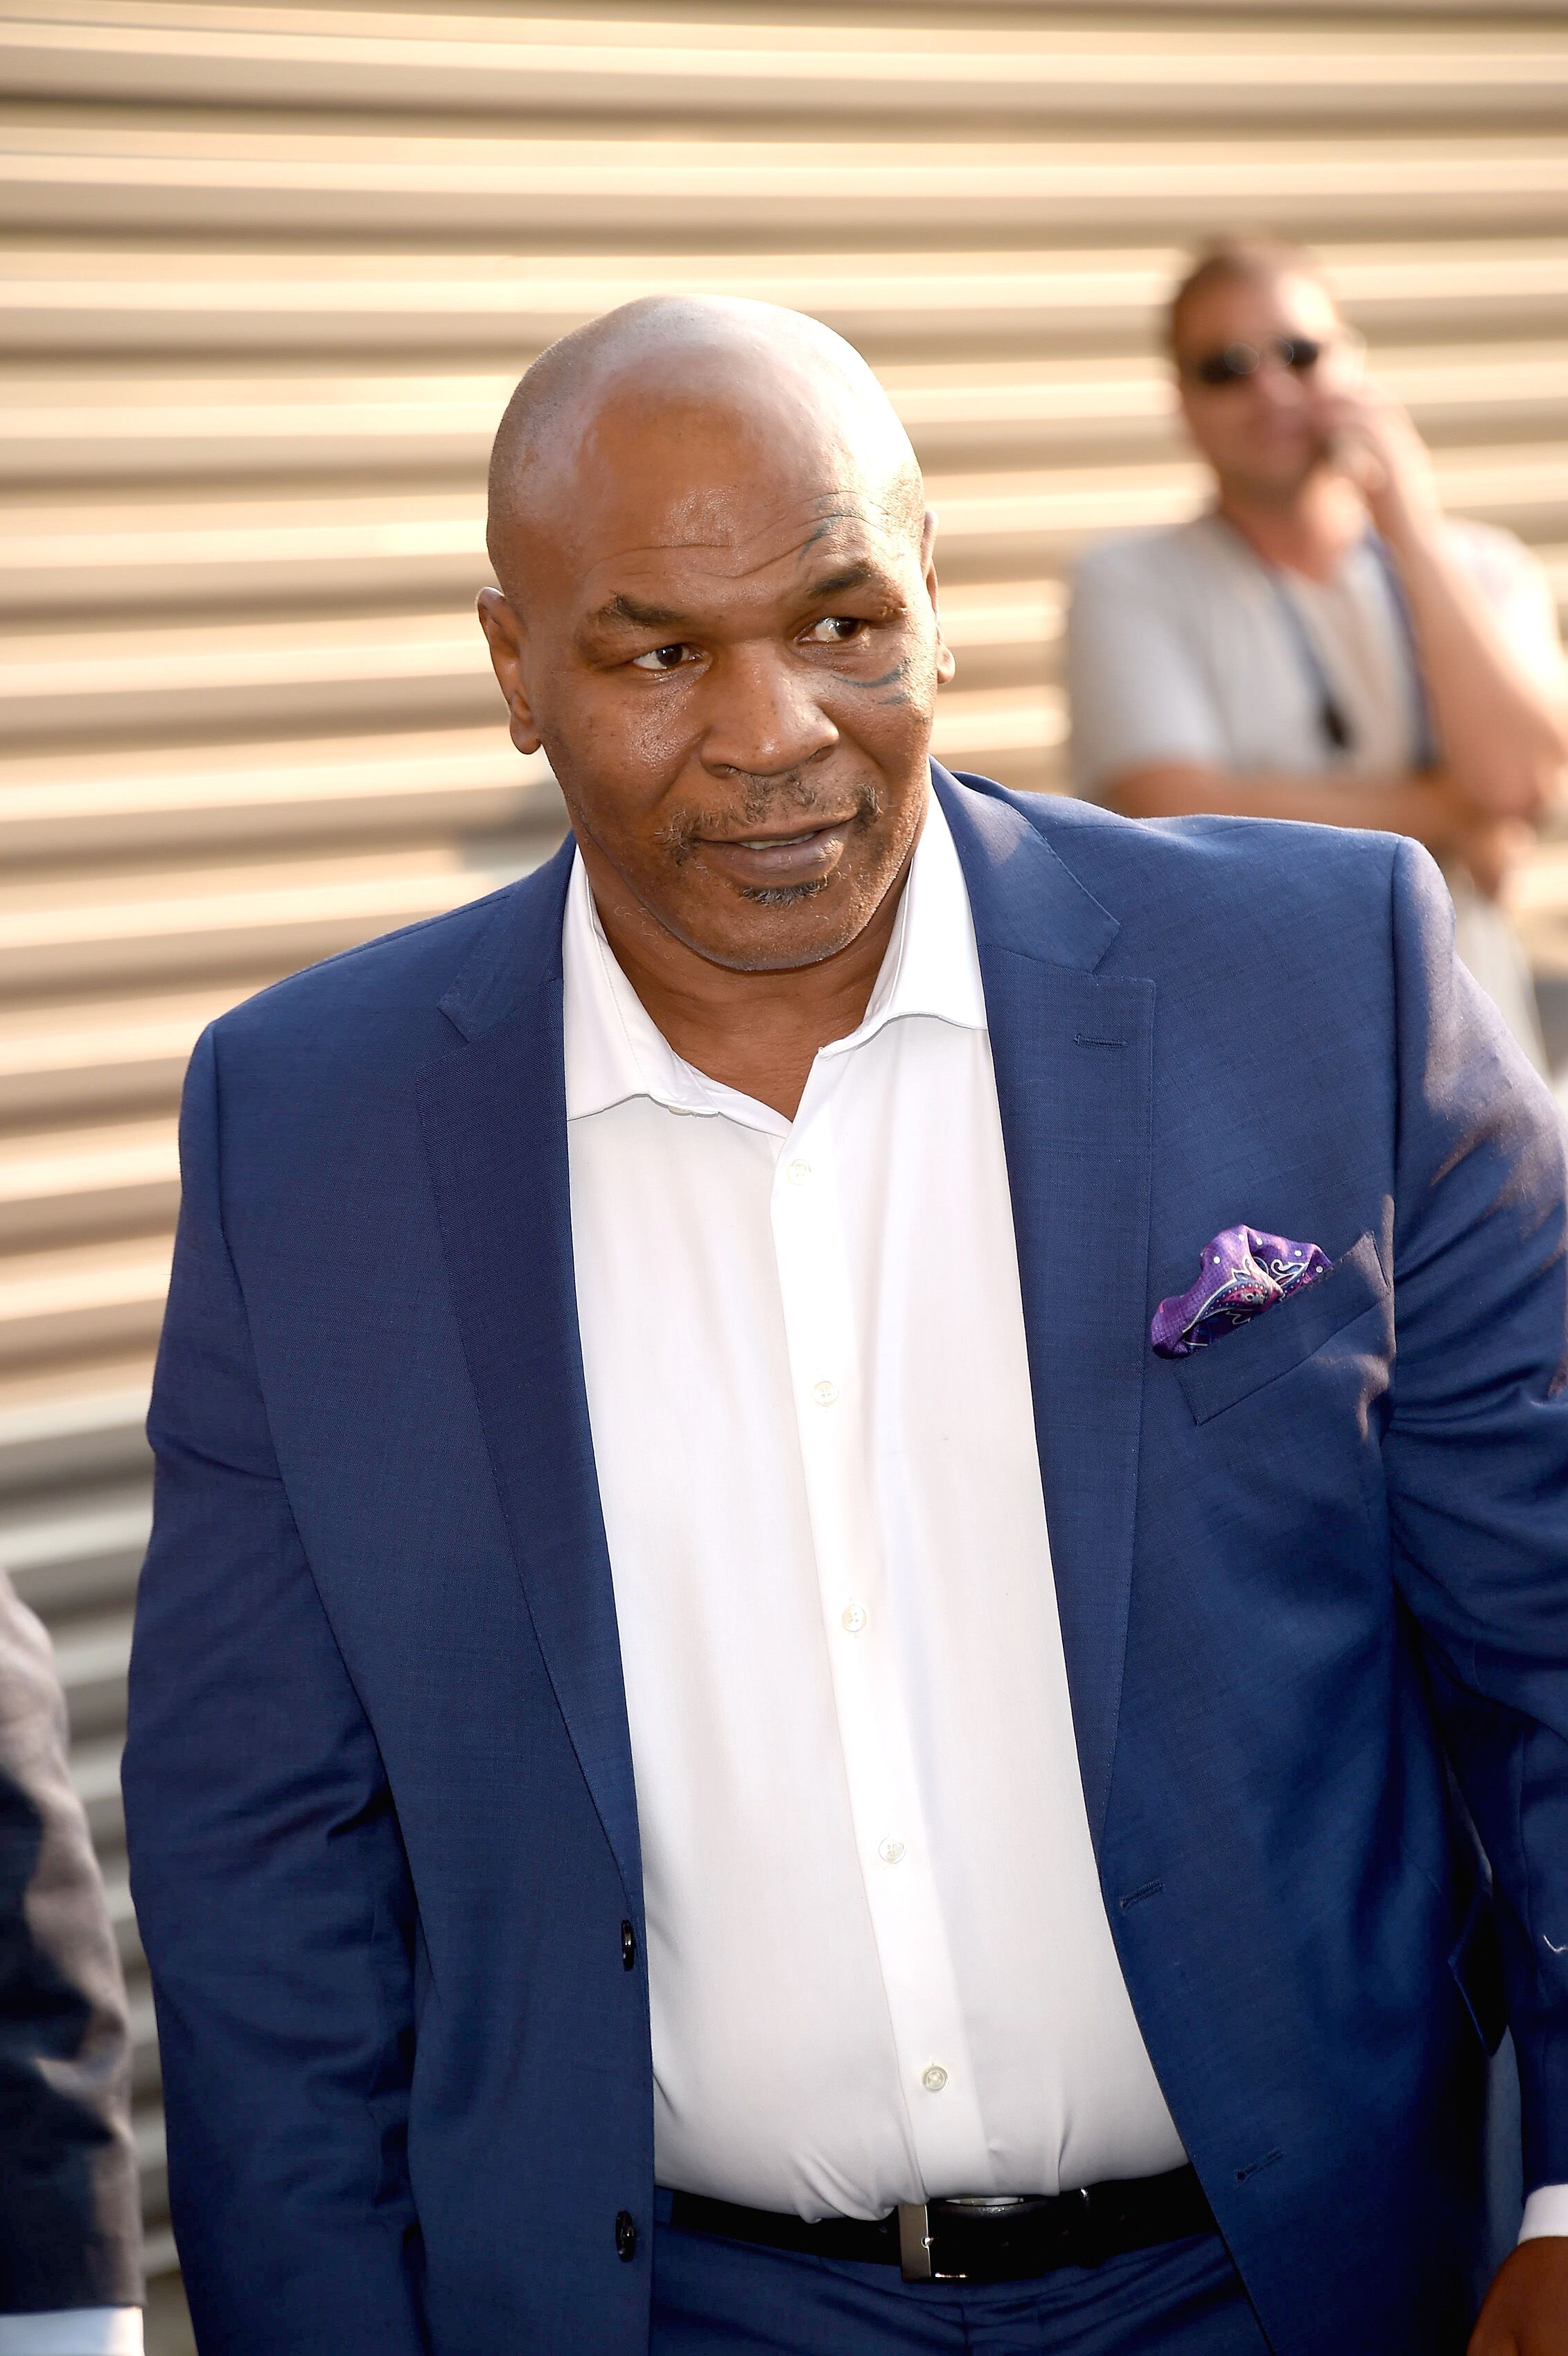 Mike Tyson attends the USTA 18th Annual Opening Night Gala Blue Carpet at USTA Billie Jean King National Tennis Center on August 27, 2018 in New York City | Photo: Getty Images 